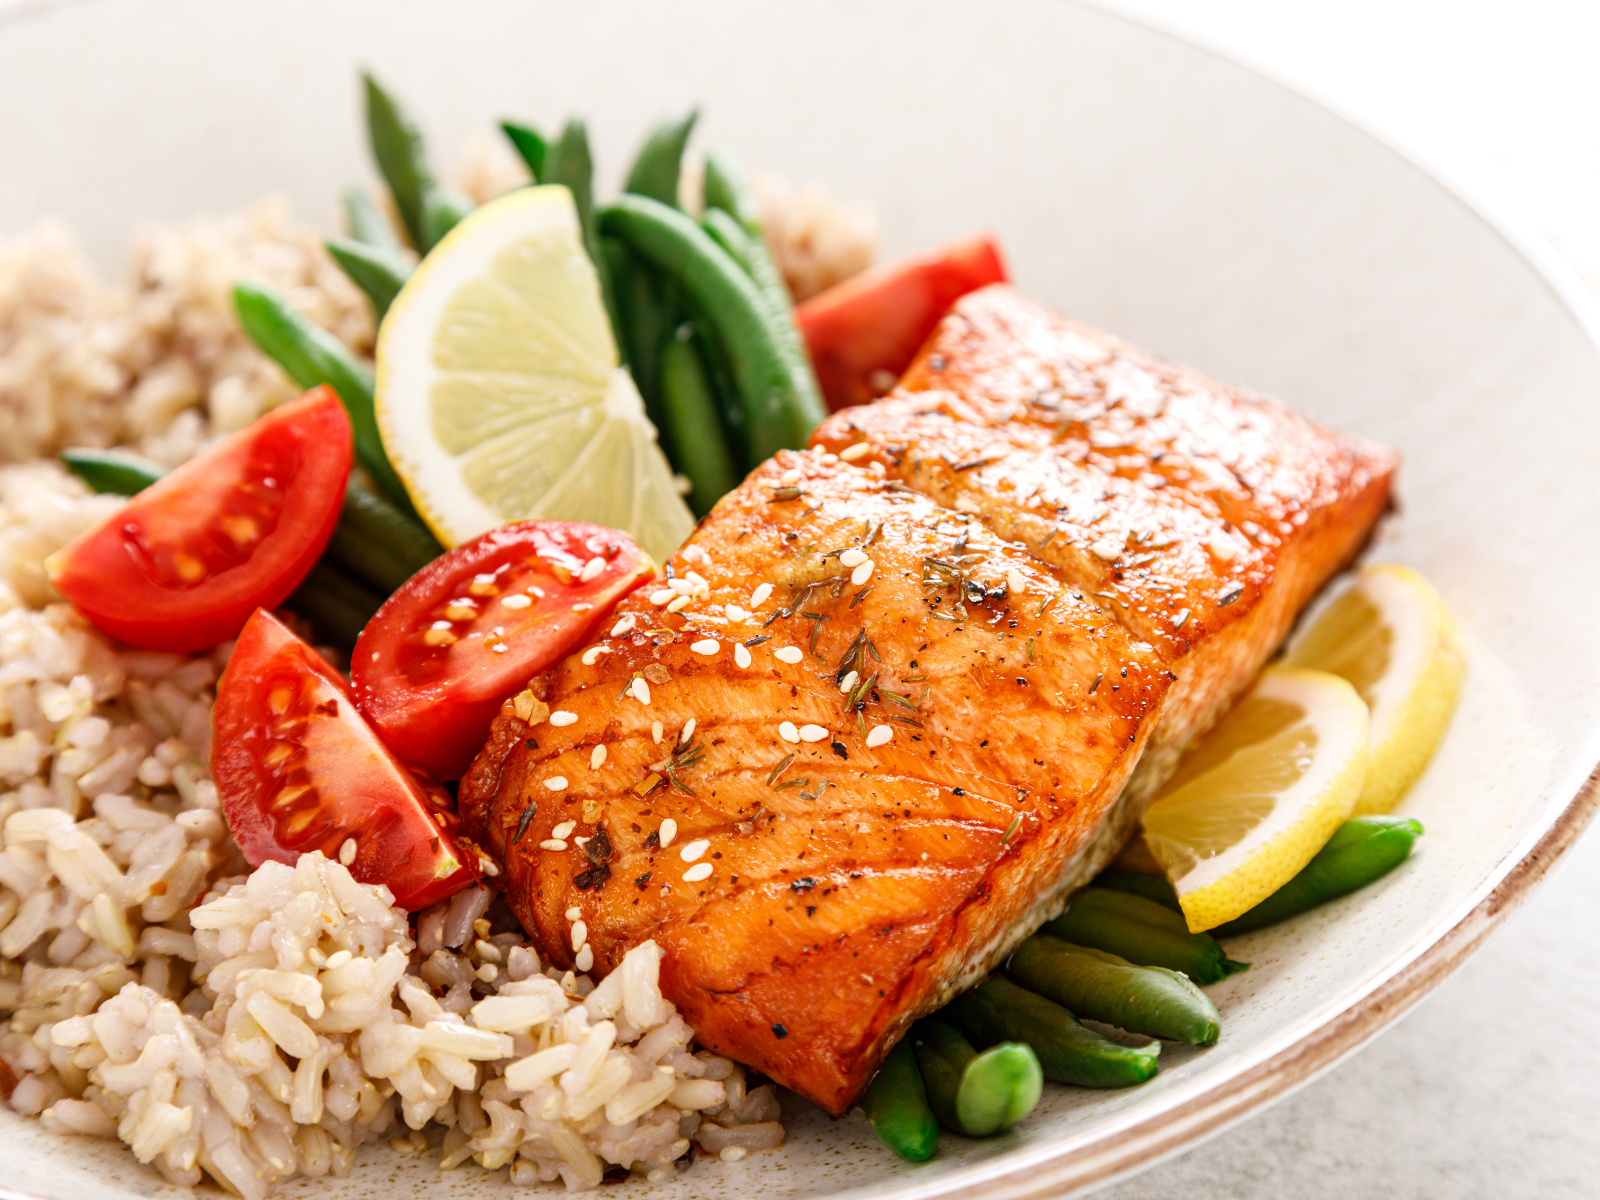 dinner plate of salmon with brown rice and veggies